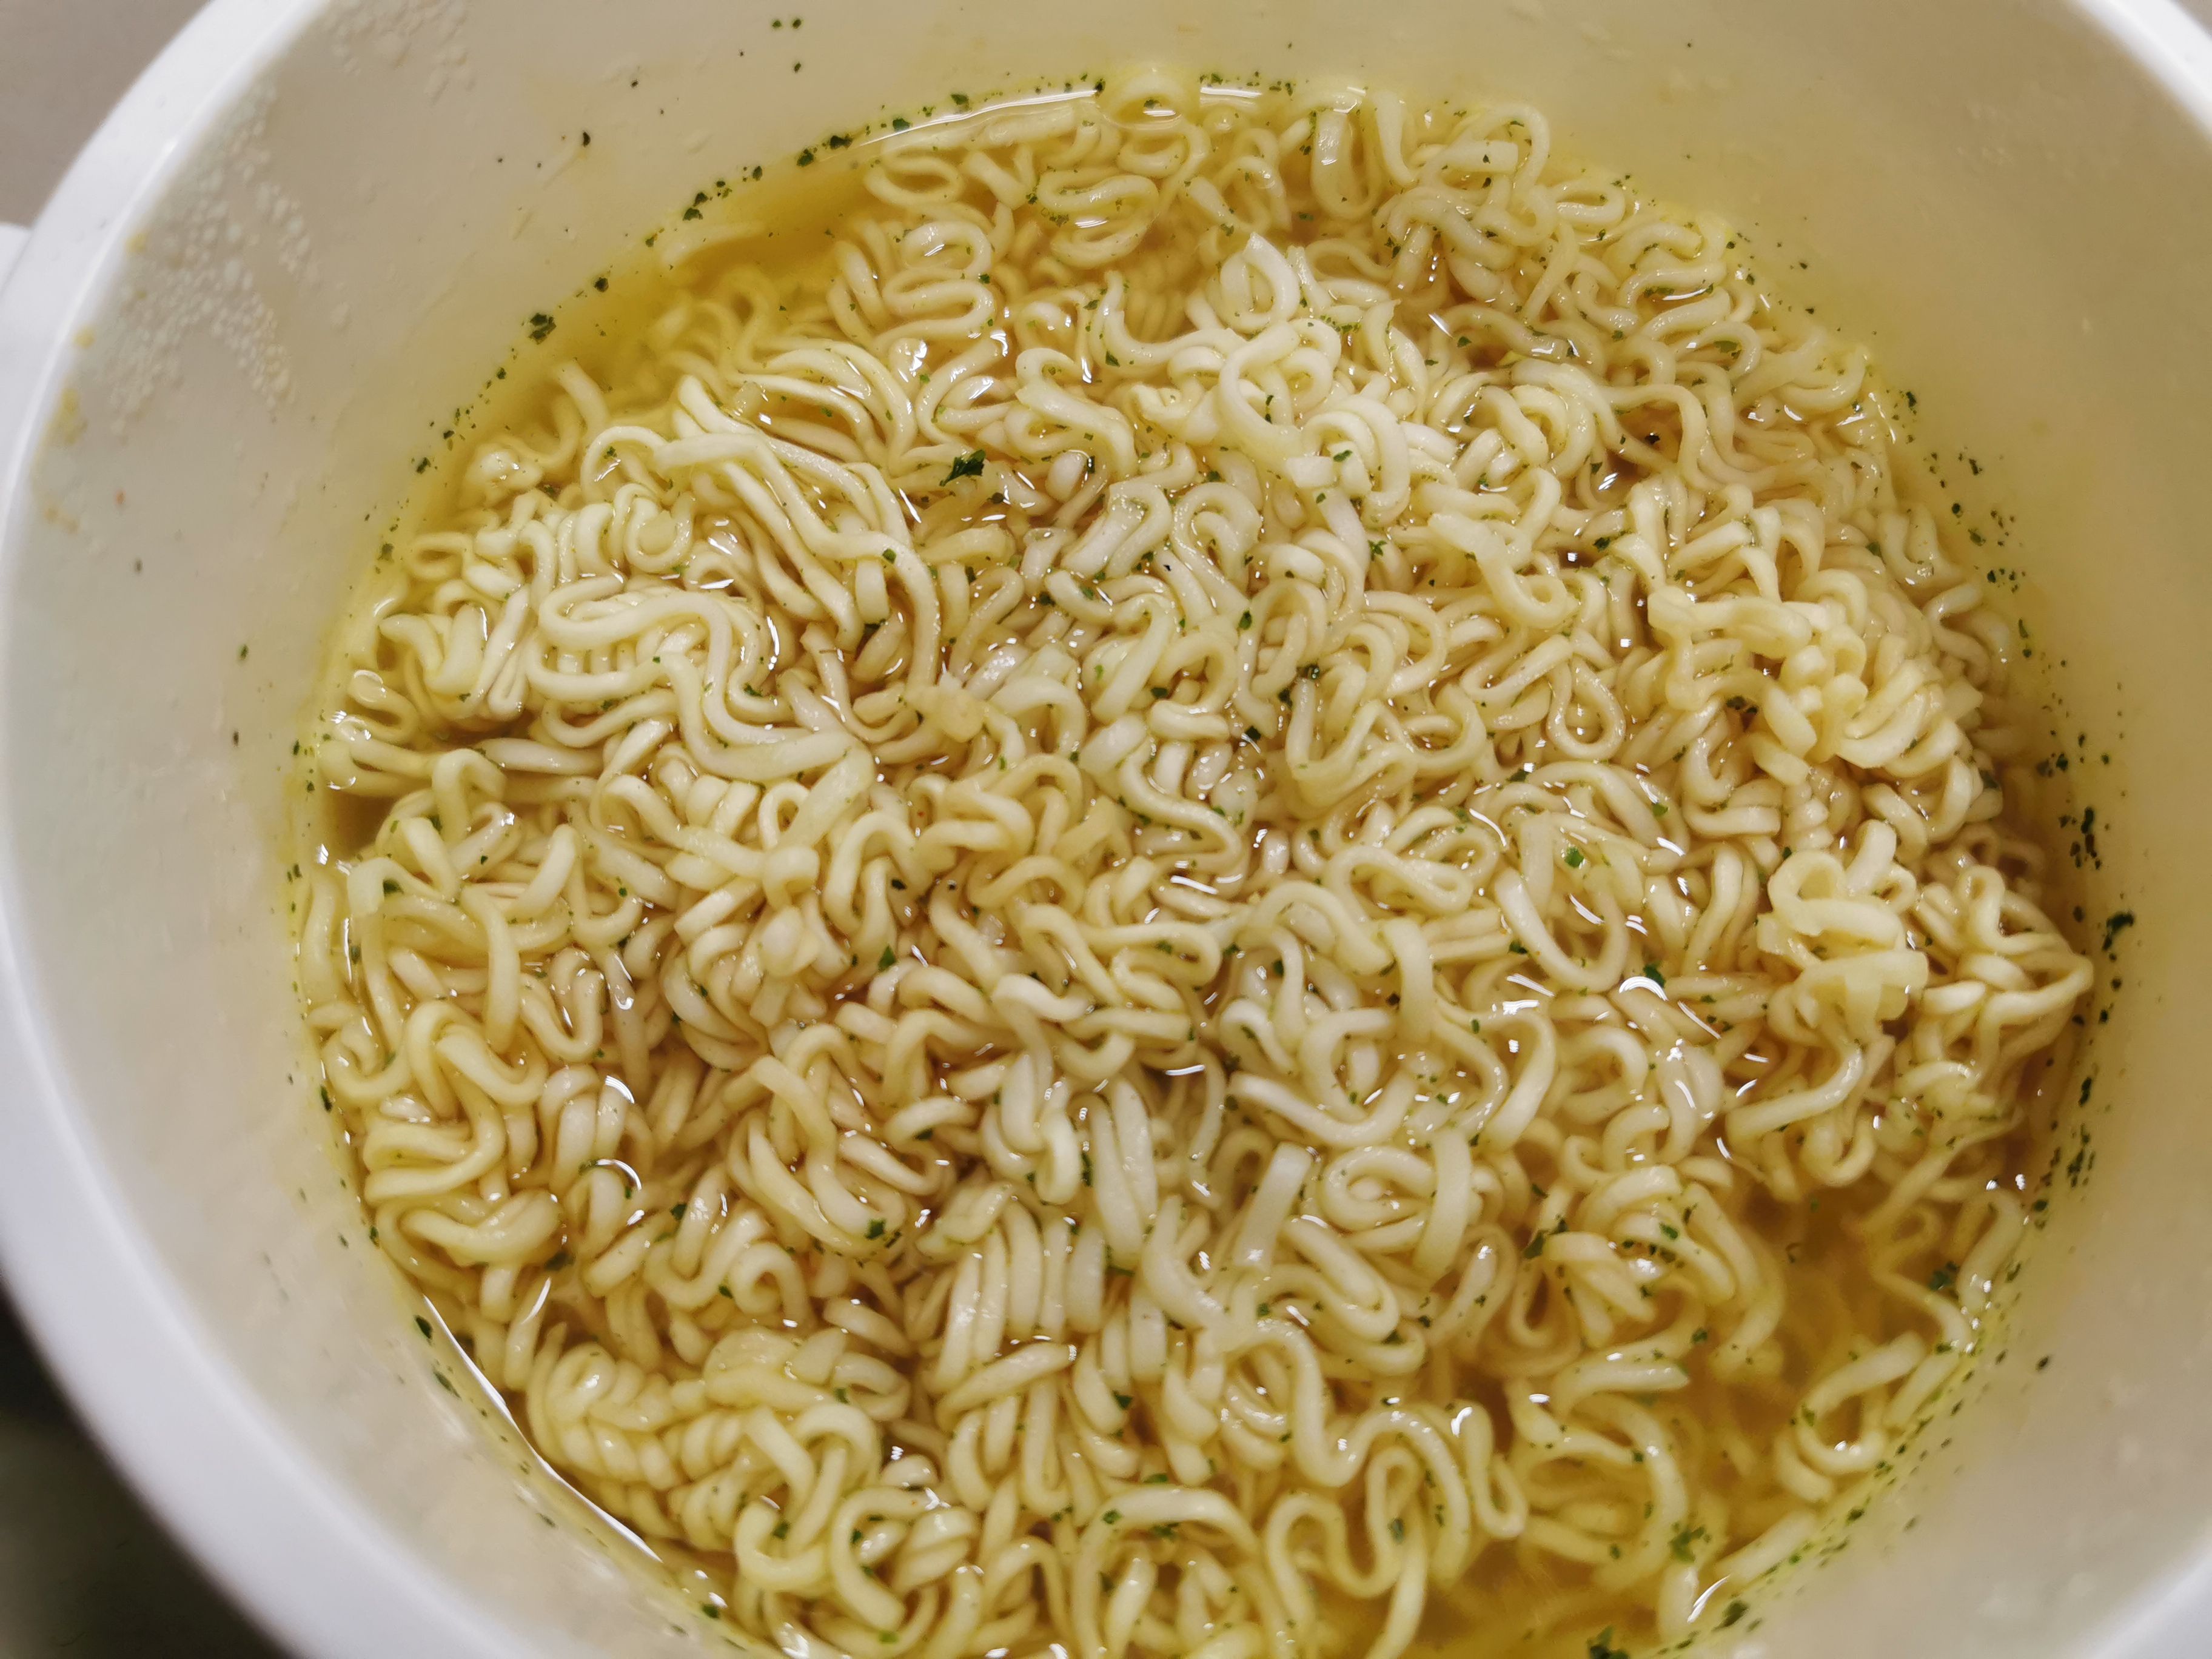 #2302: Anacom "Instant Noodles with Spicy Chicken Flavour"